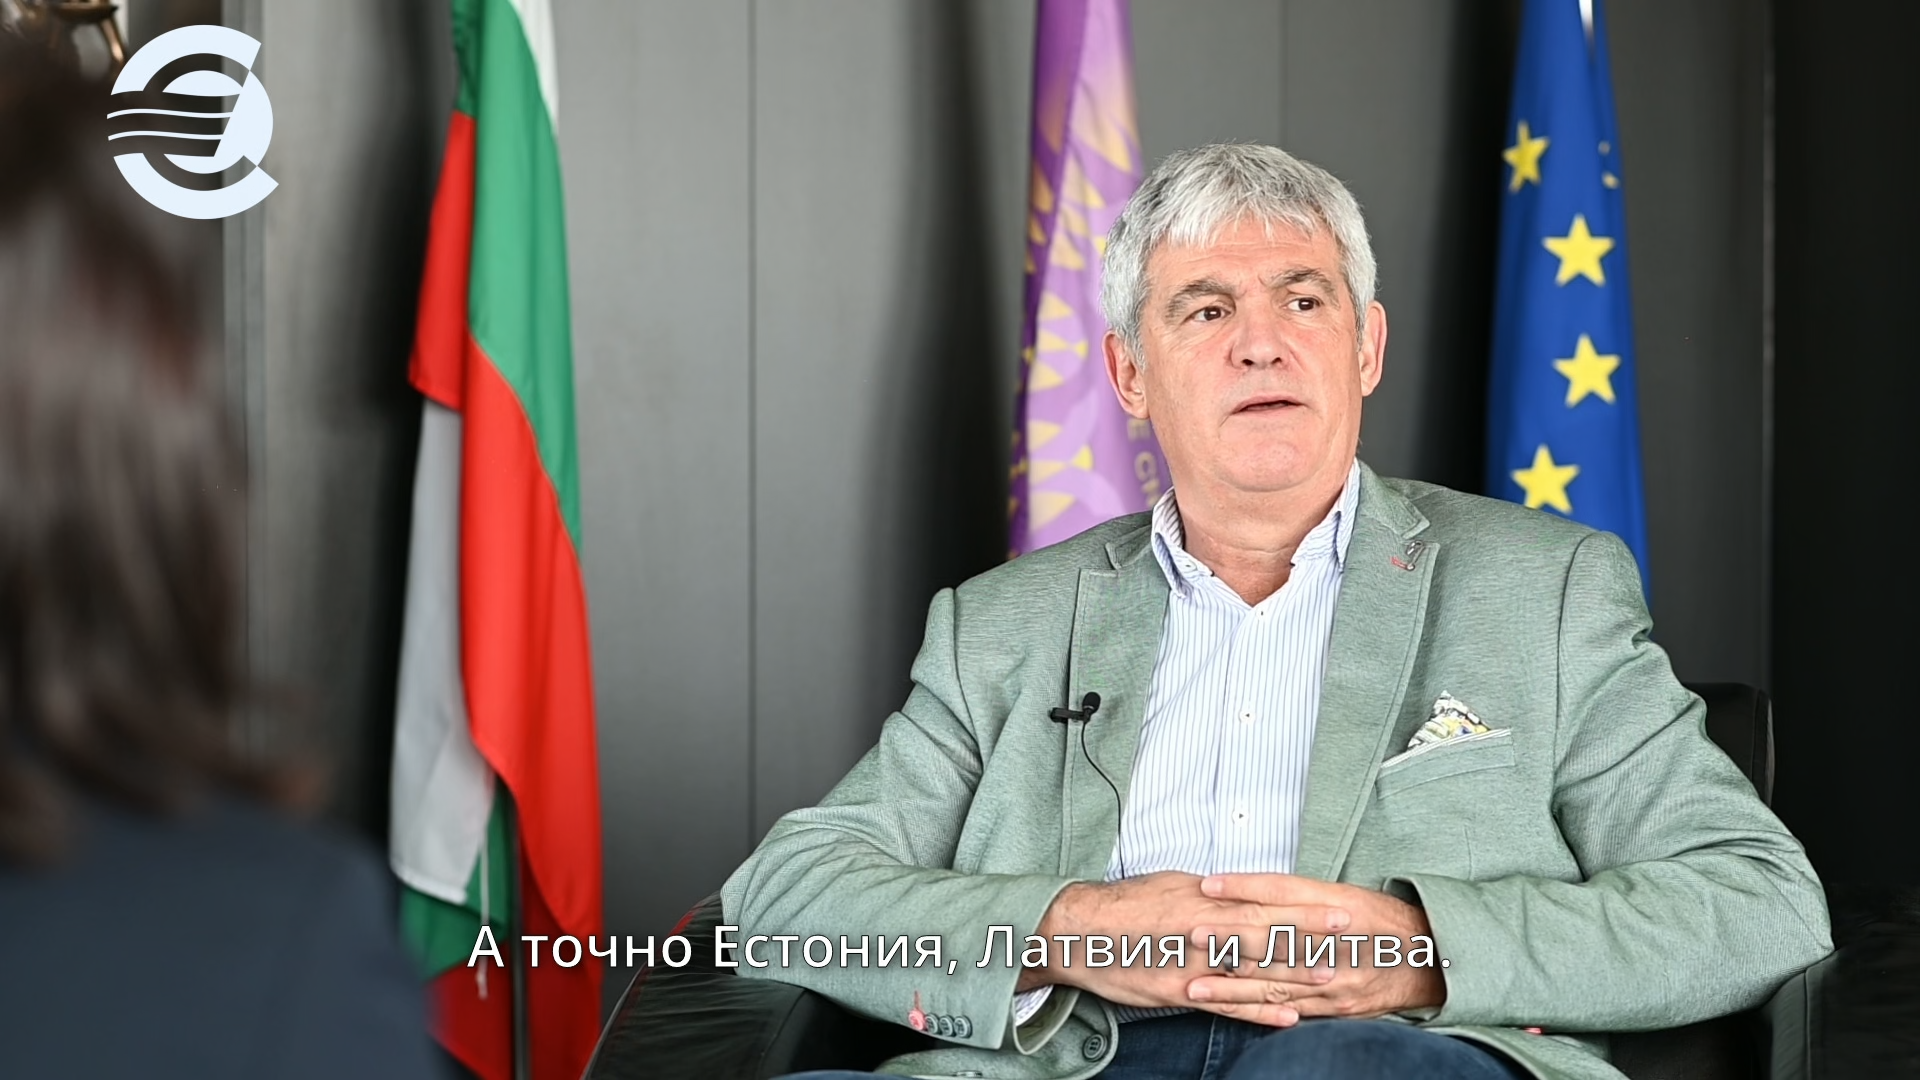 Plamen Dimitrov, President of the Confederation of Independent Trade Unions in Bulgaria: We expect accelerated income growth in Bulgaria after joining the Euro area